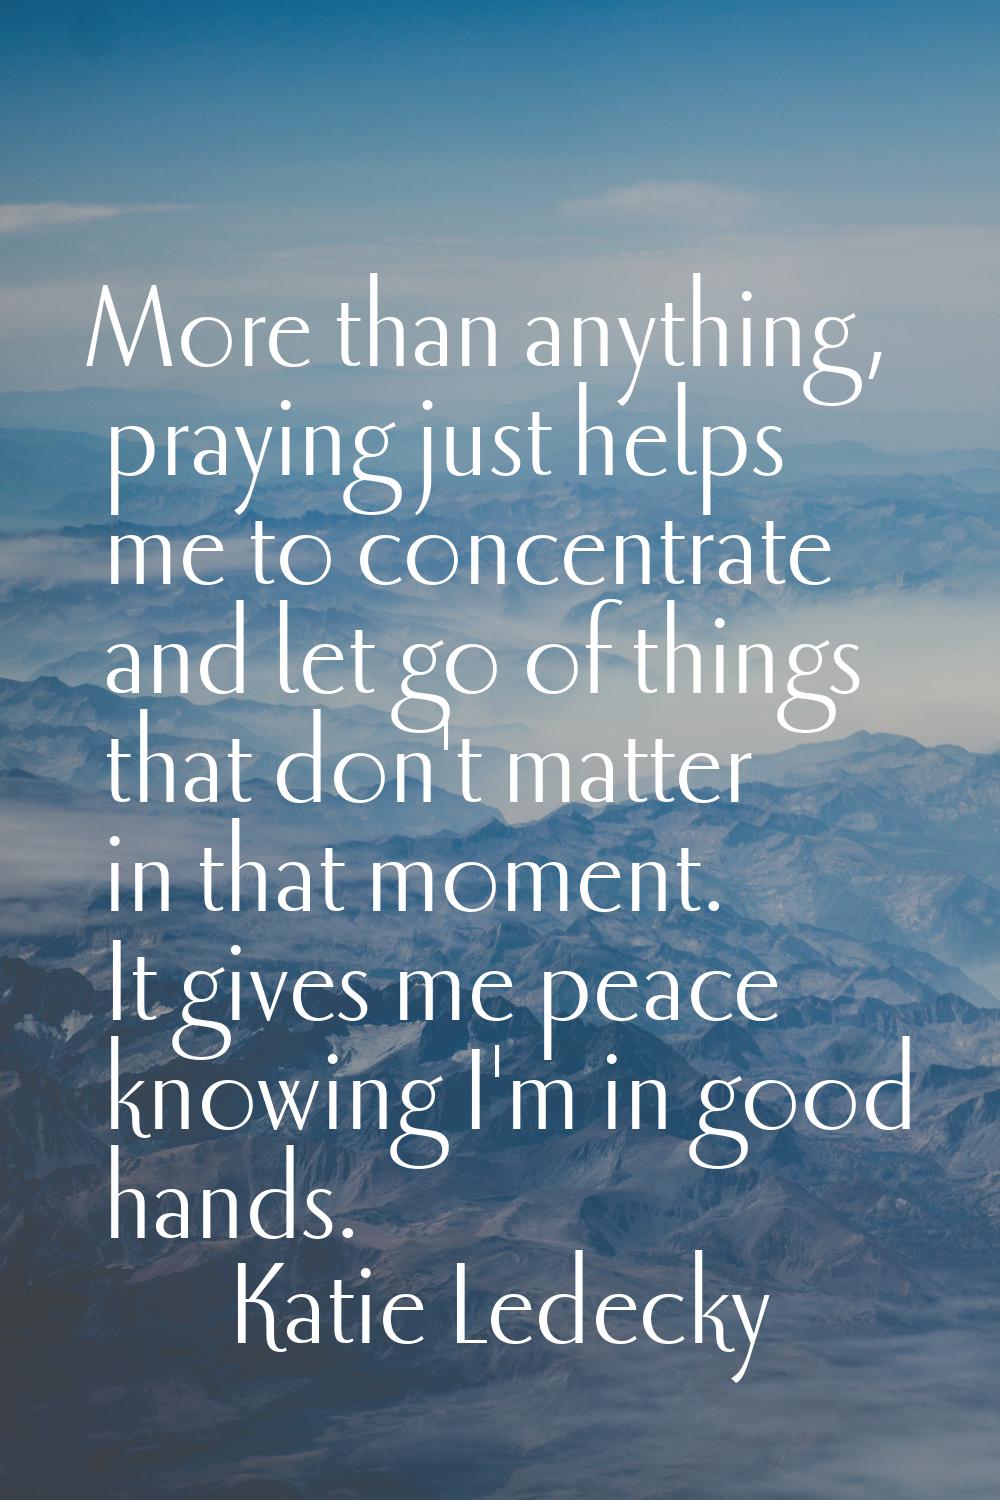 More than anything, praying just helps me to concentrate and let go of things that don't matter in 